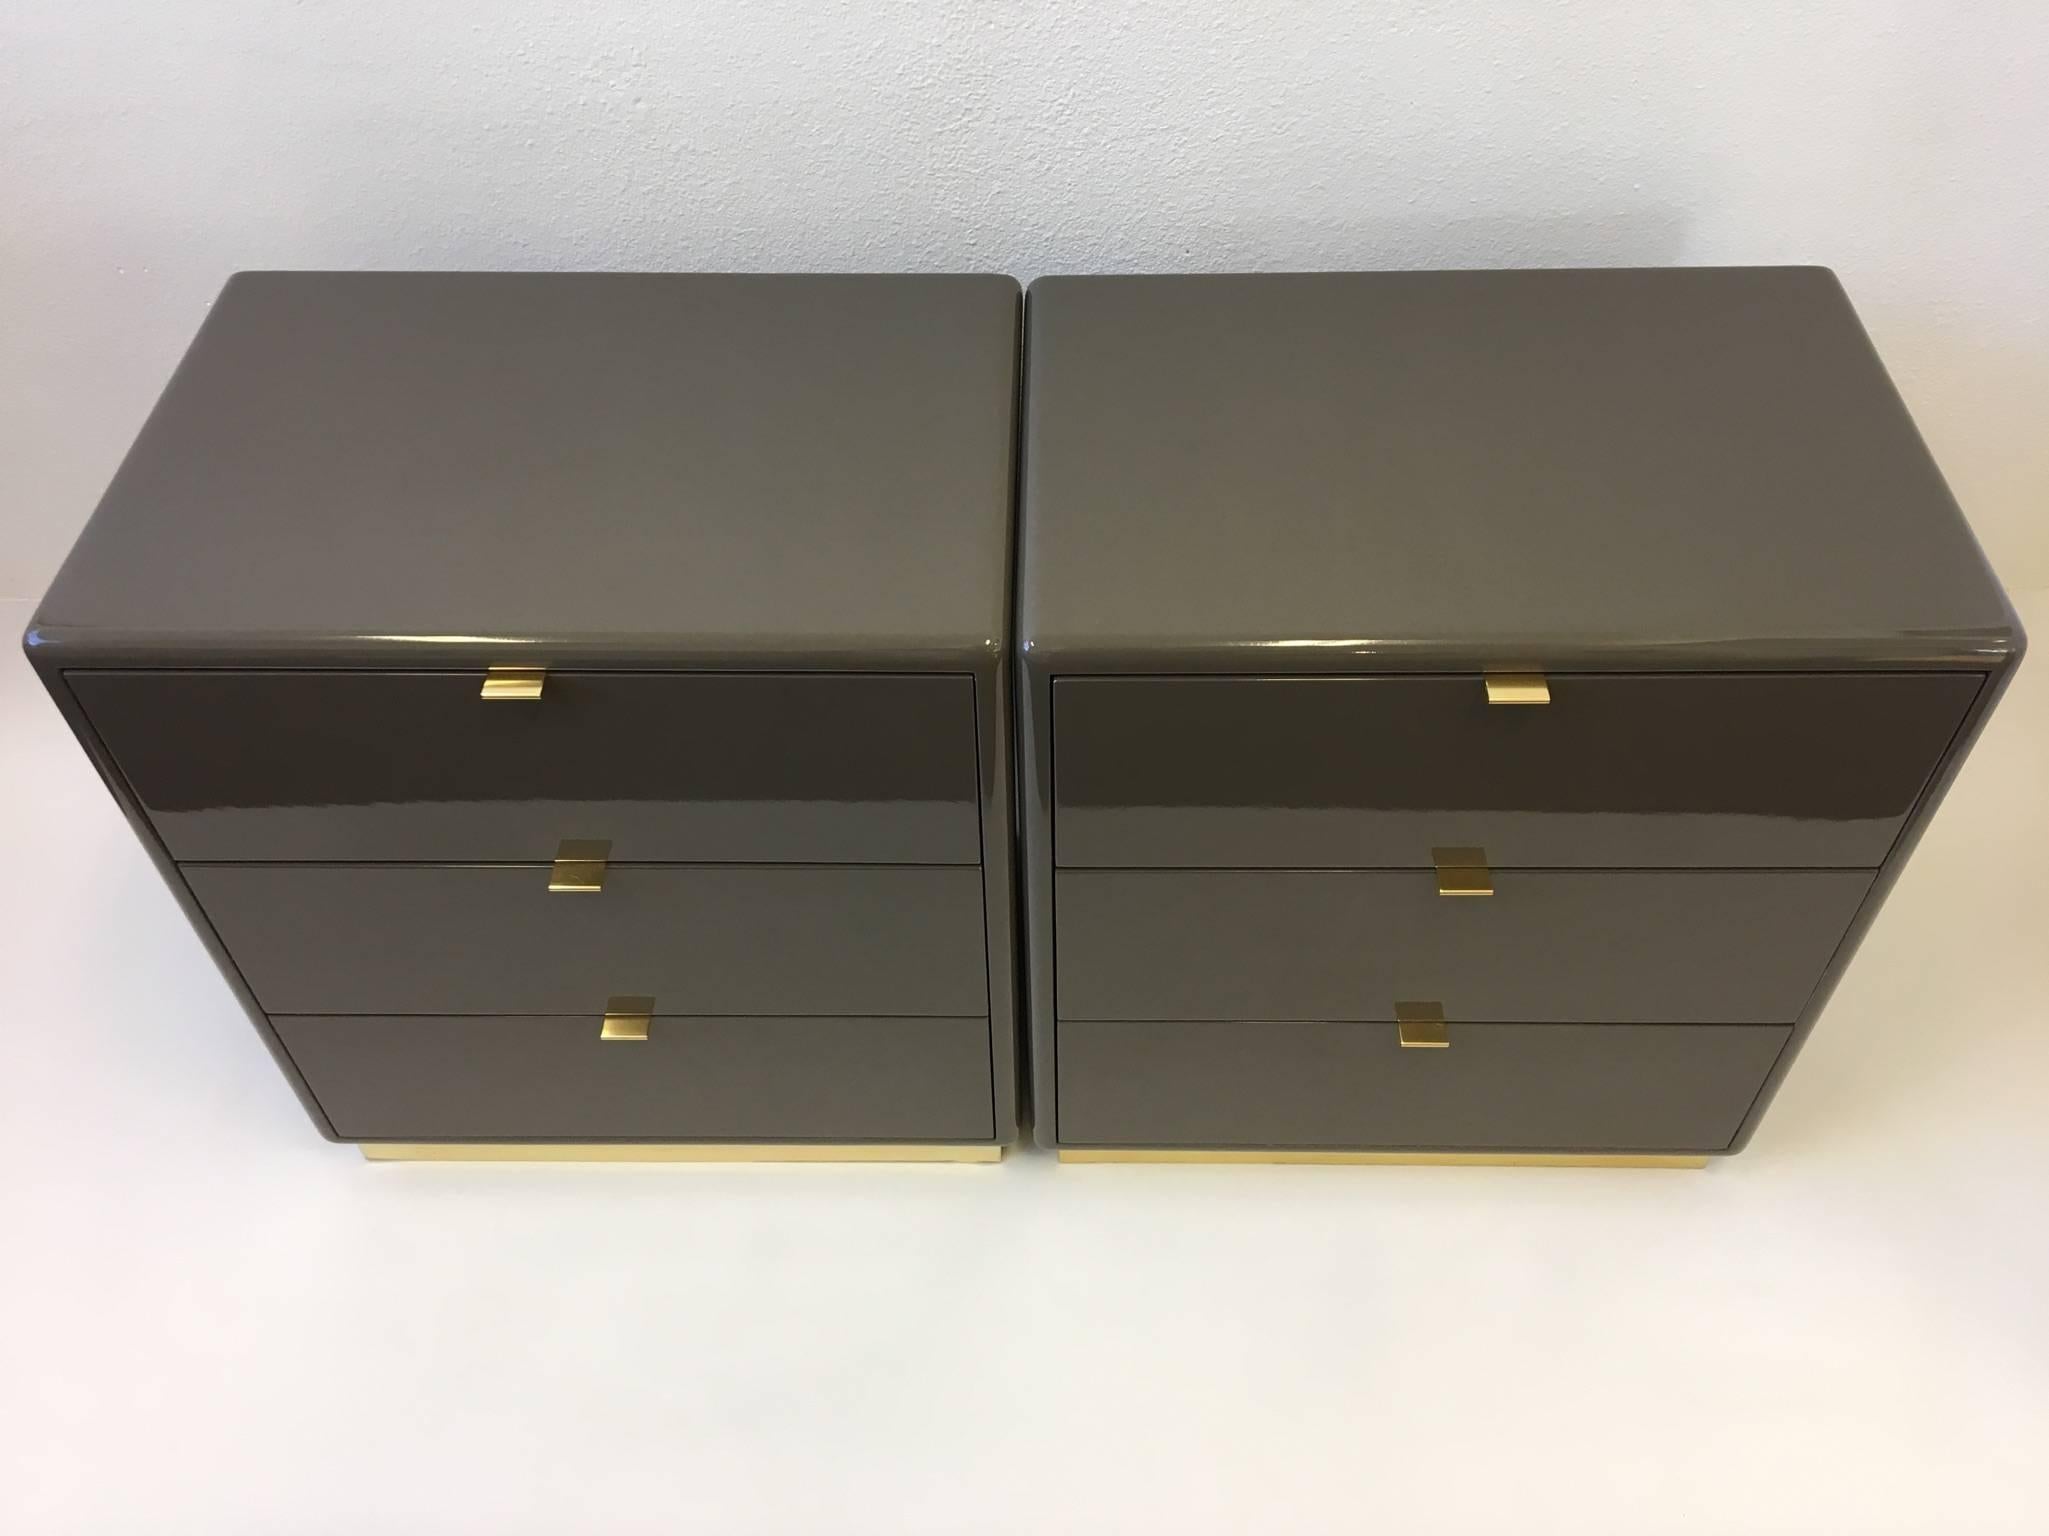 Polished Pair of Light Brown Lacquer and Brass Nightstands by Steve Chase